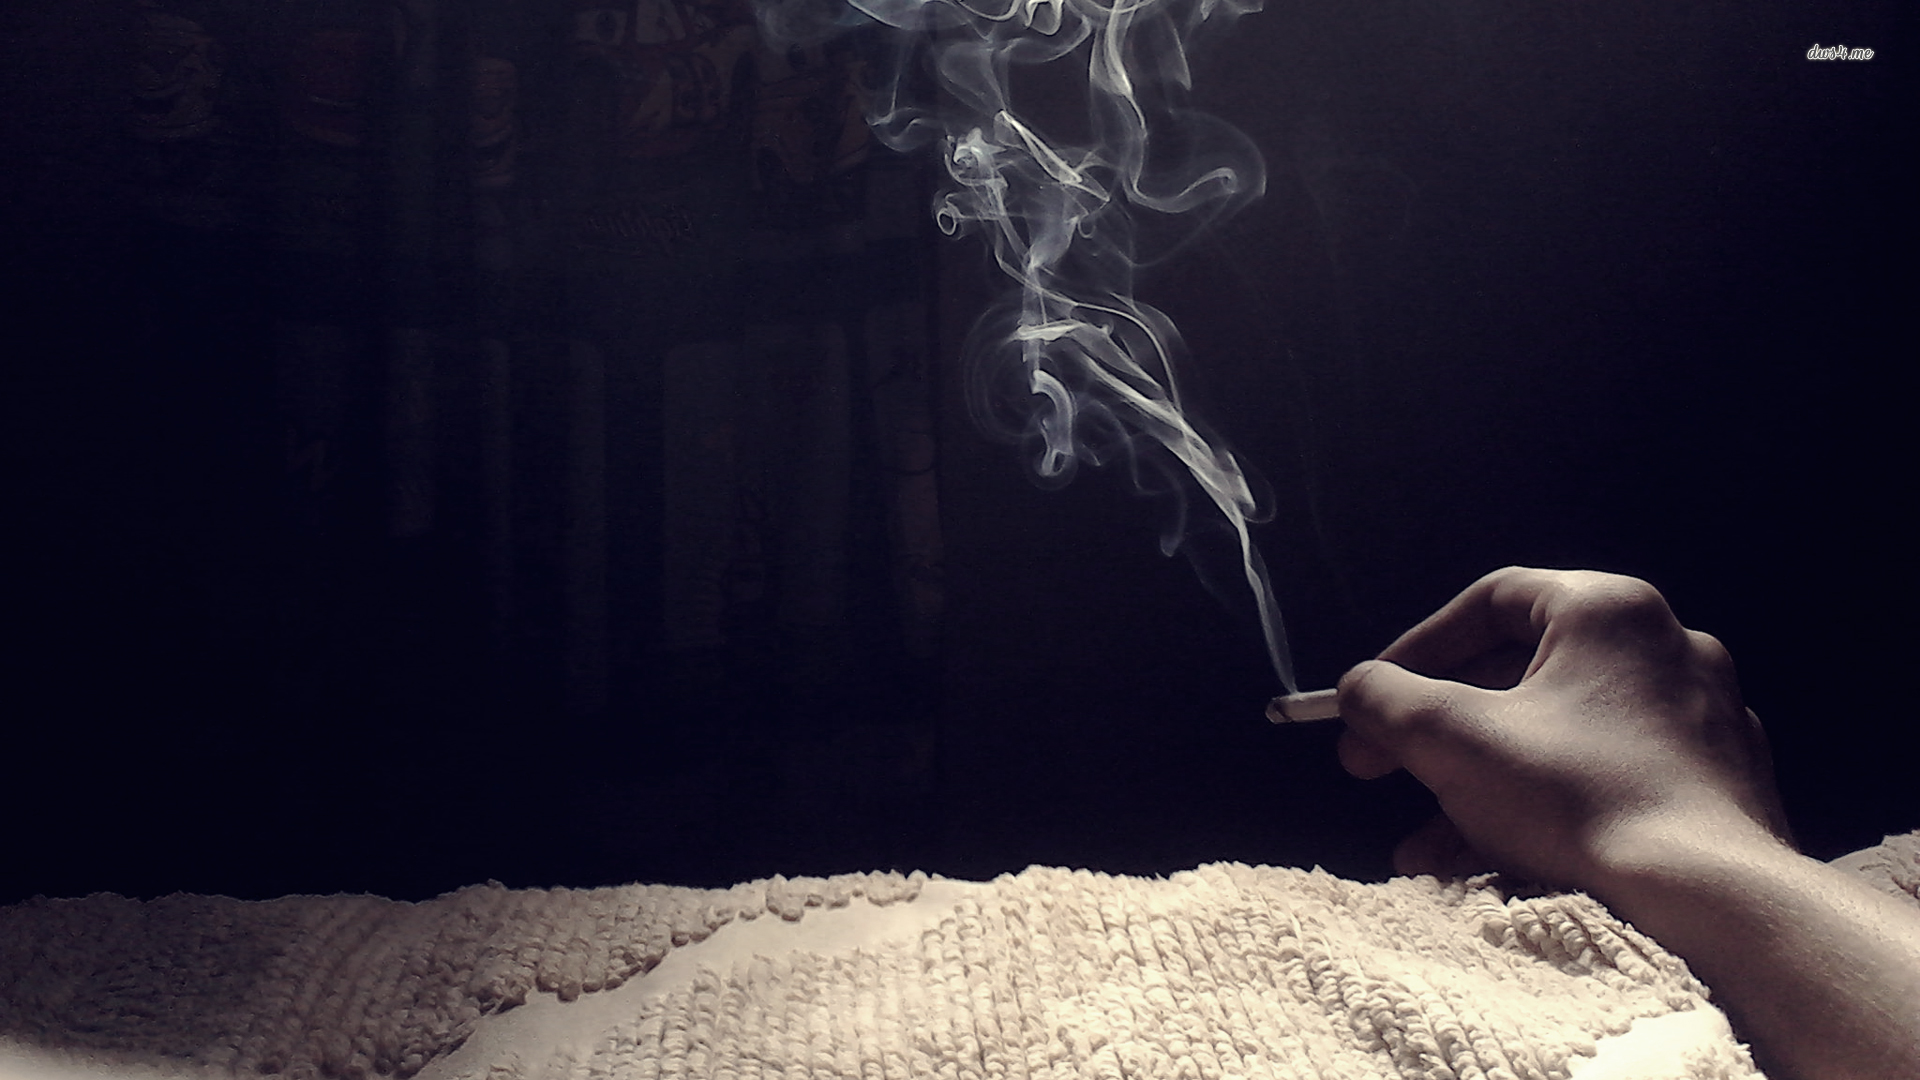 Smoking Wallpapers HDQ Smoking Wallpapers Archives 42